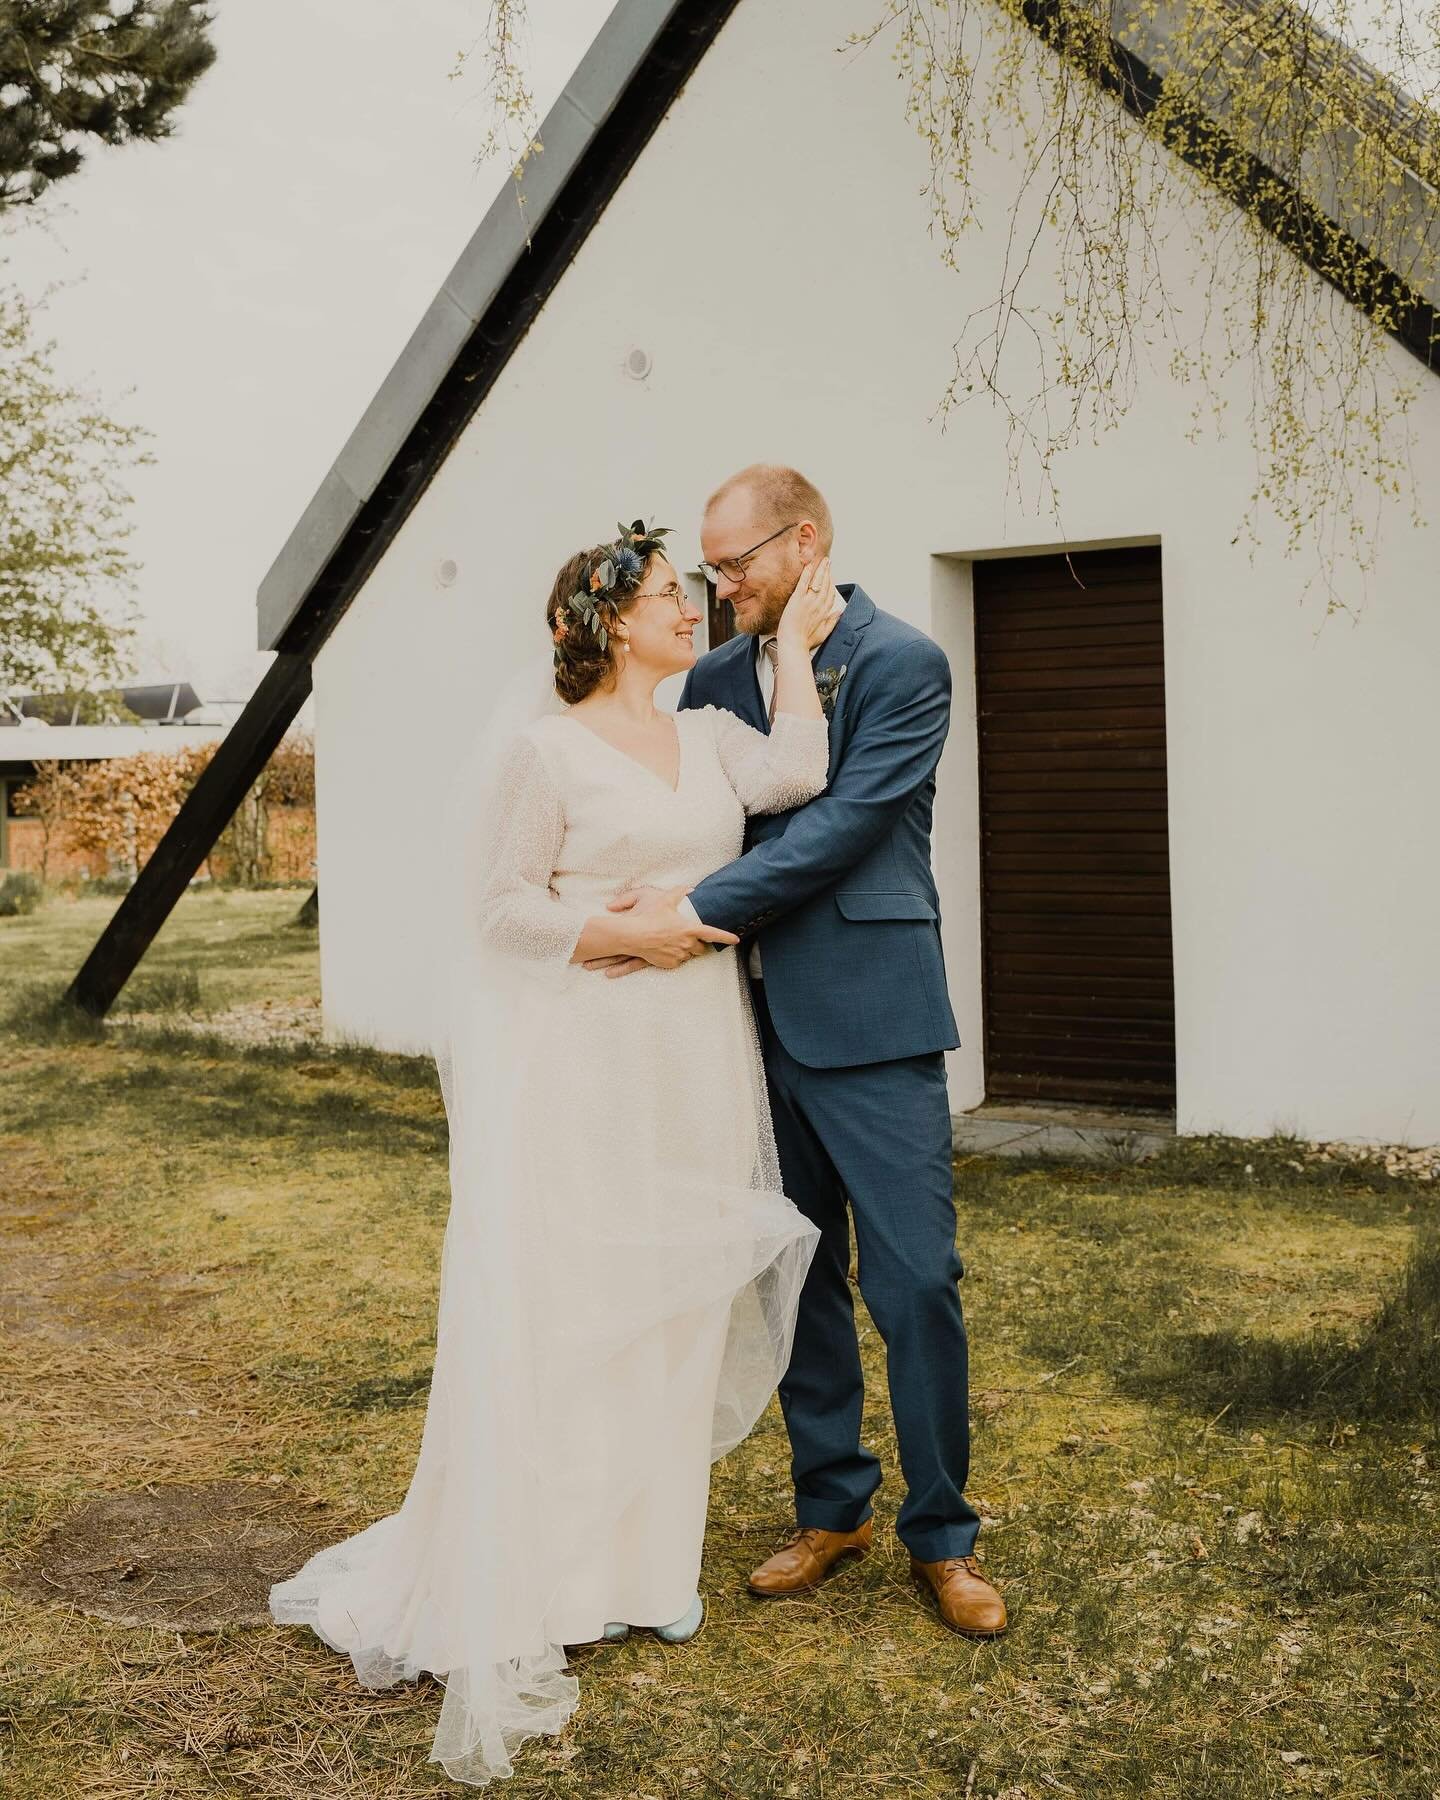 Wedding highlights from yesterday 🤍 I have no other words than.. down to earth, heartwarming, rustic, candid.. and much more. L&aelig;rke &amp; S&oslash;ren truly touched me with their atmosphere. It feels like with each wedding, I&rsquo;m falling d